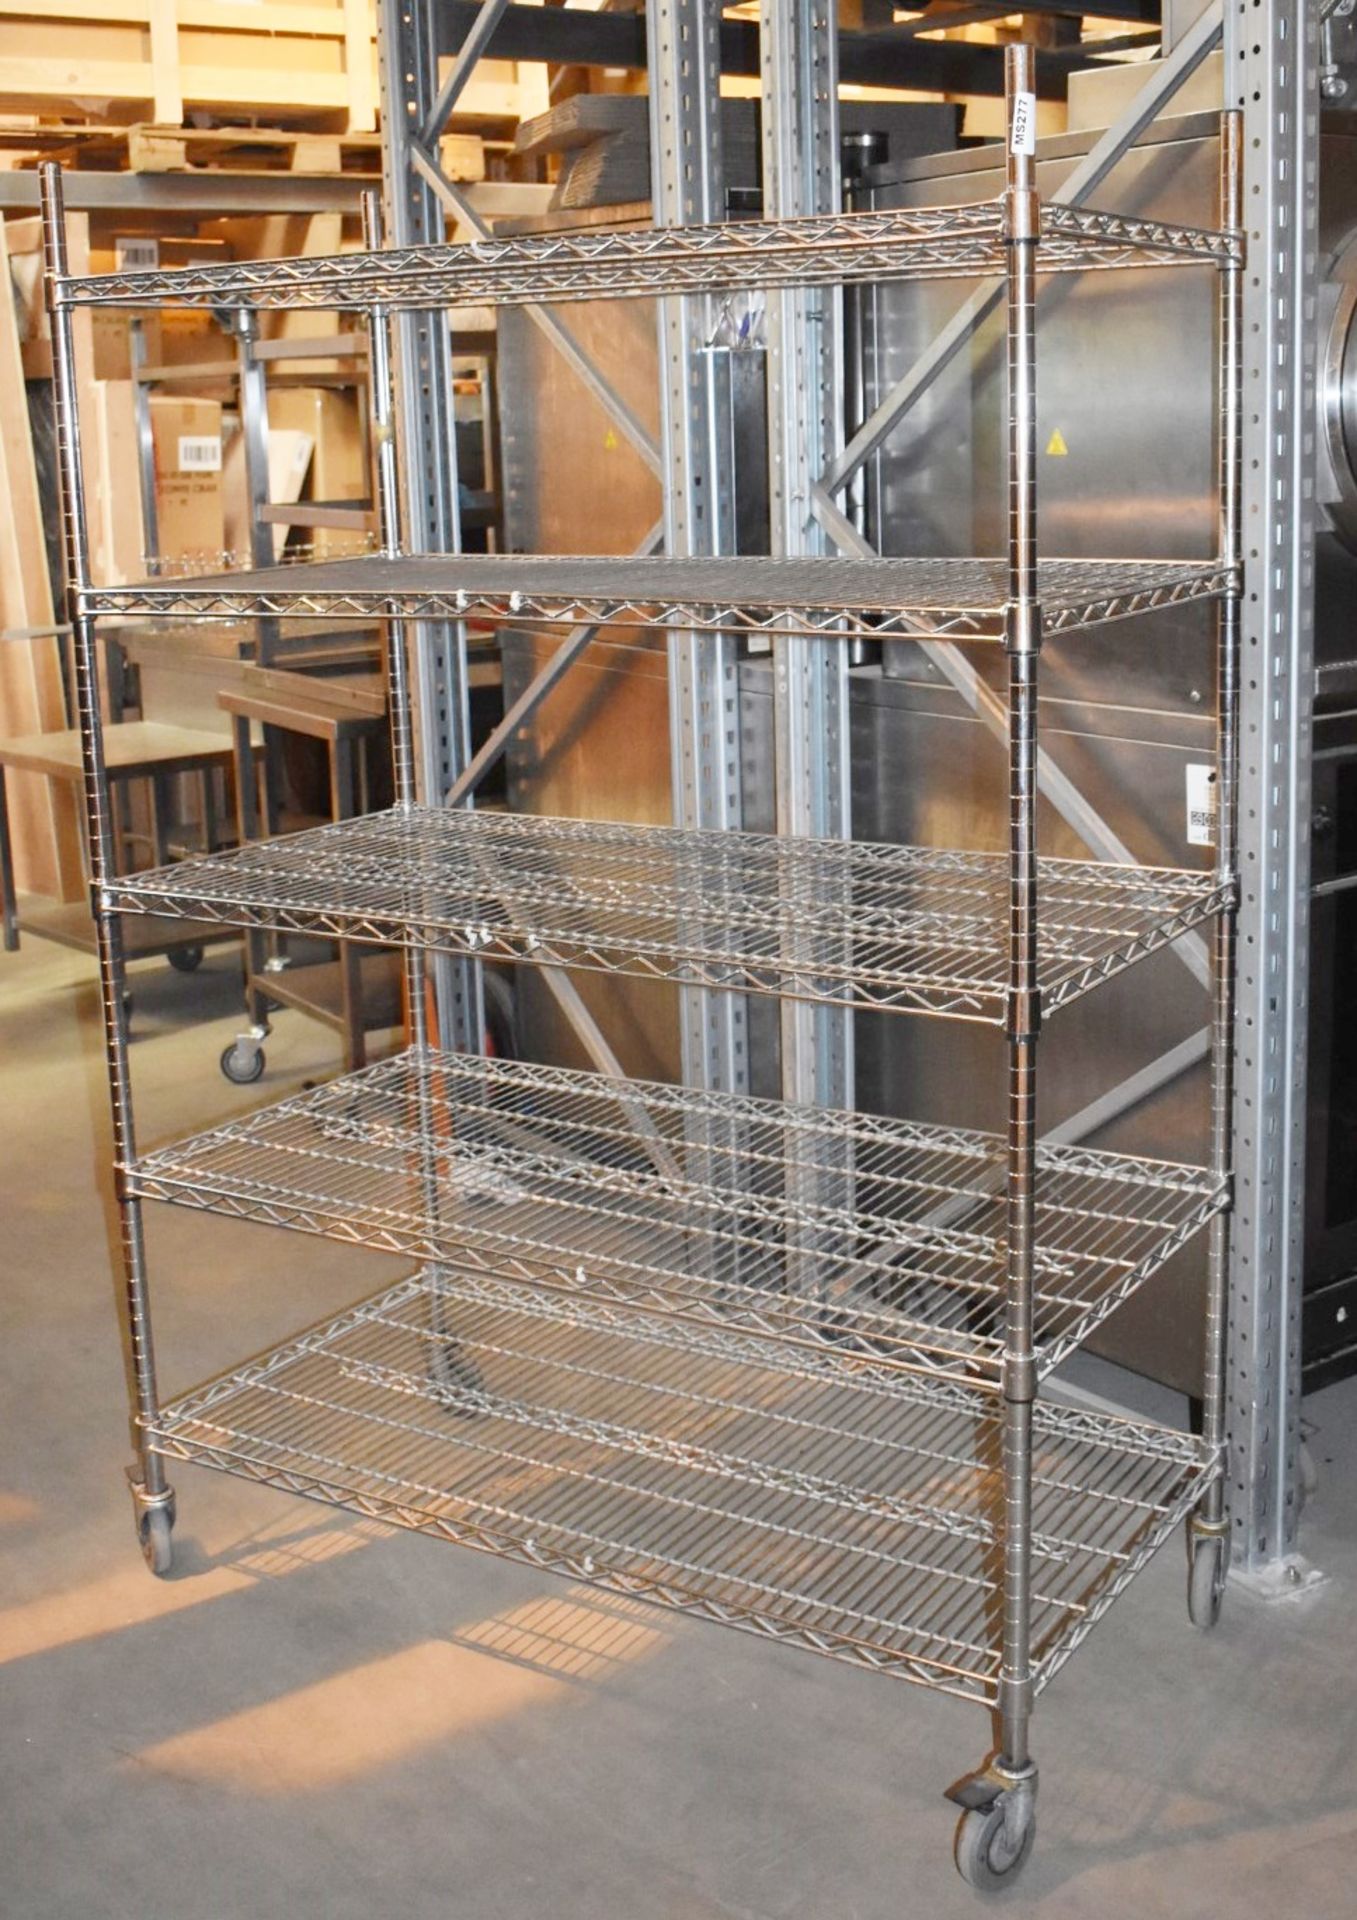 1 x Stainless Steel Commercial Wire Shelving Unit on Wheels - H175 x W120 x D60 cms - CL533 - Ref